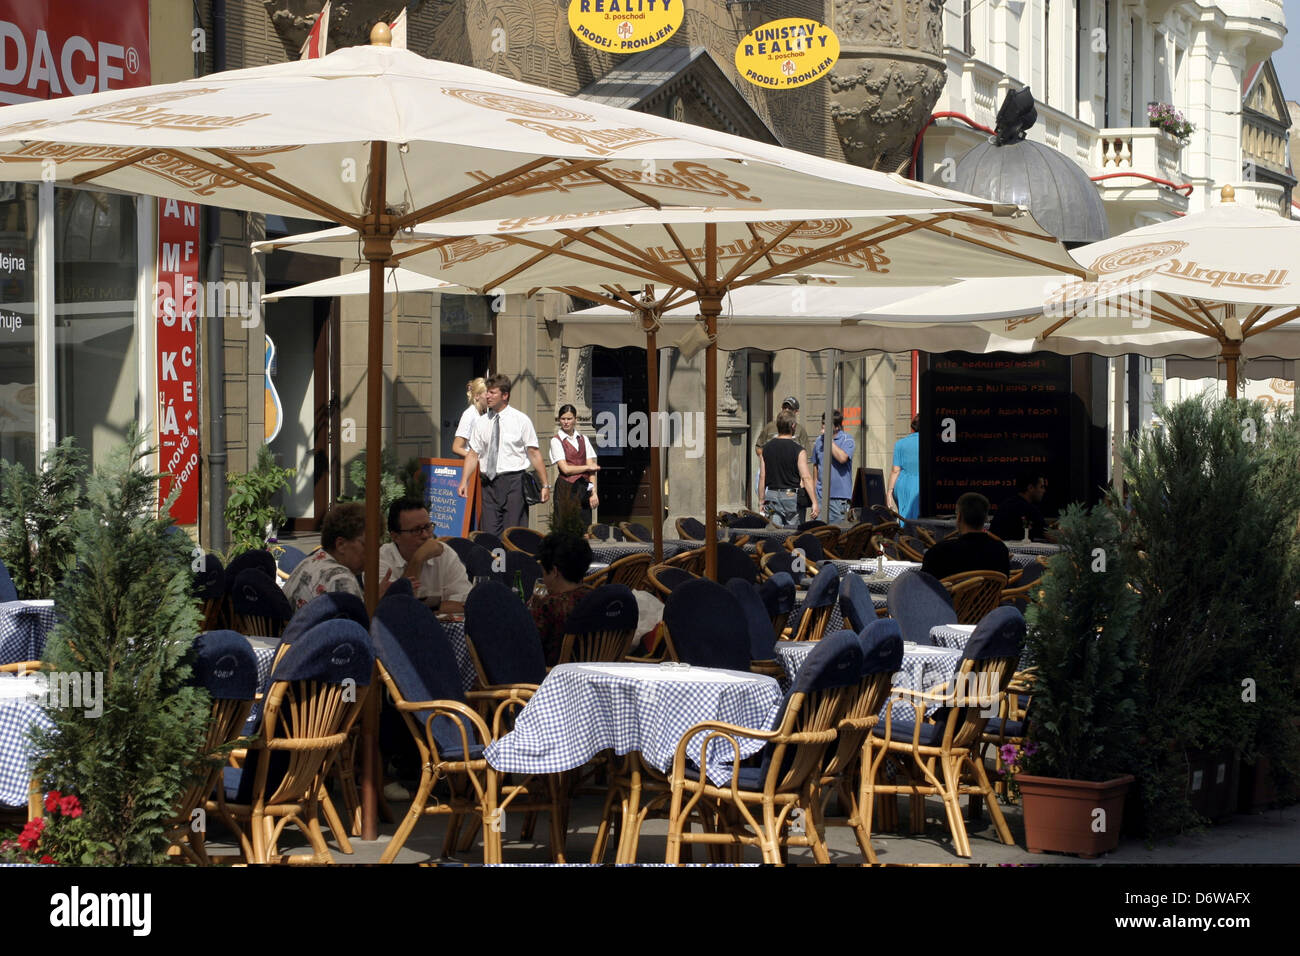 Czech Republic, Southern Moravia, Brno, People resting in cafe Stock Photo